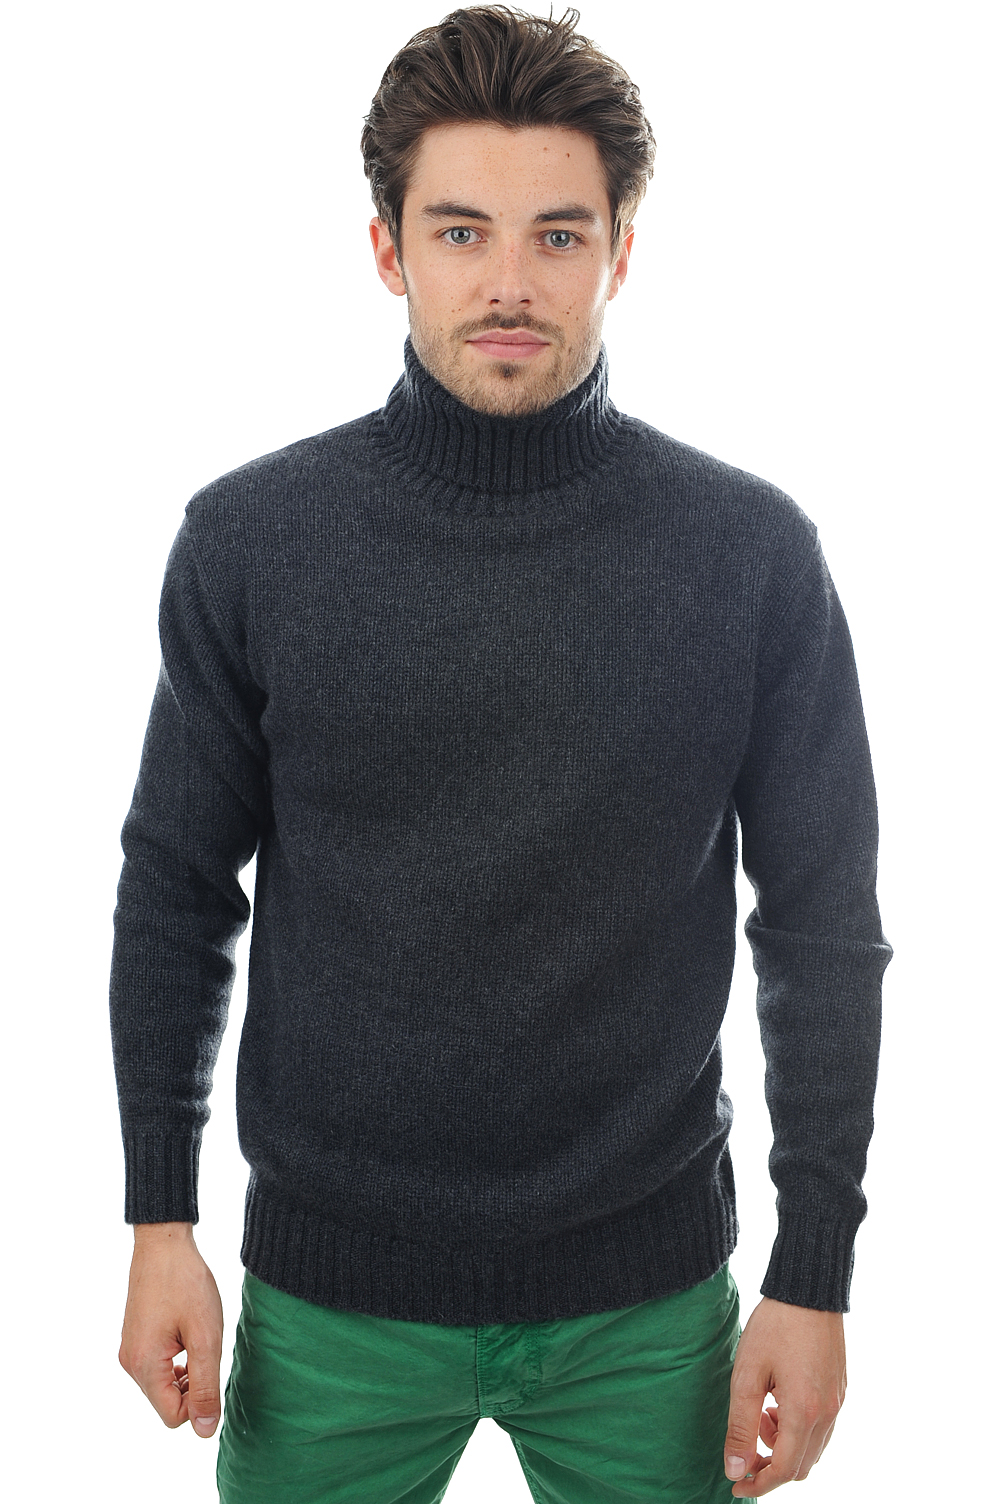 Cashmere men chunky sweater achille charcoal marl 2xl